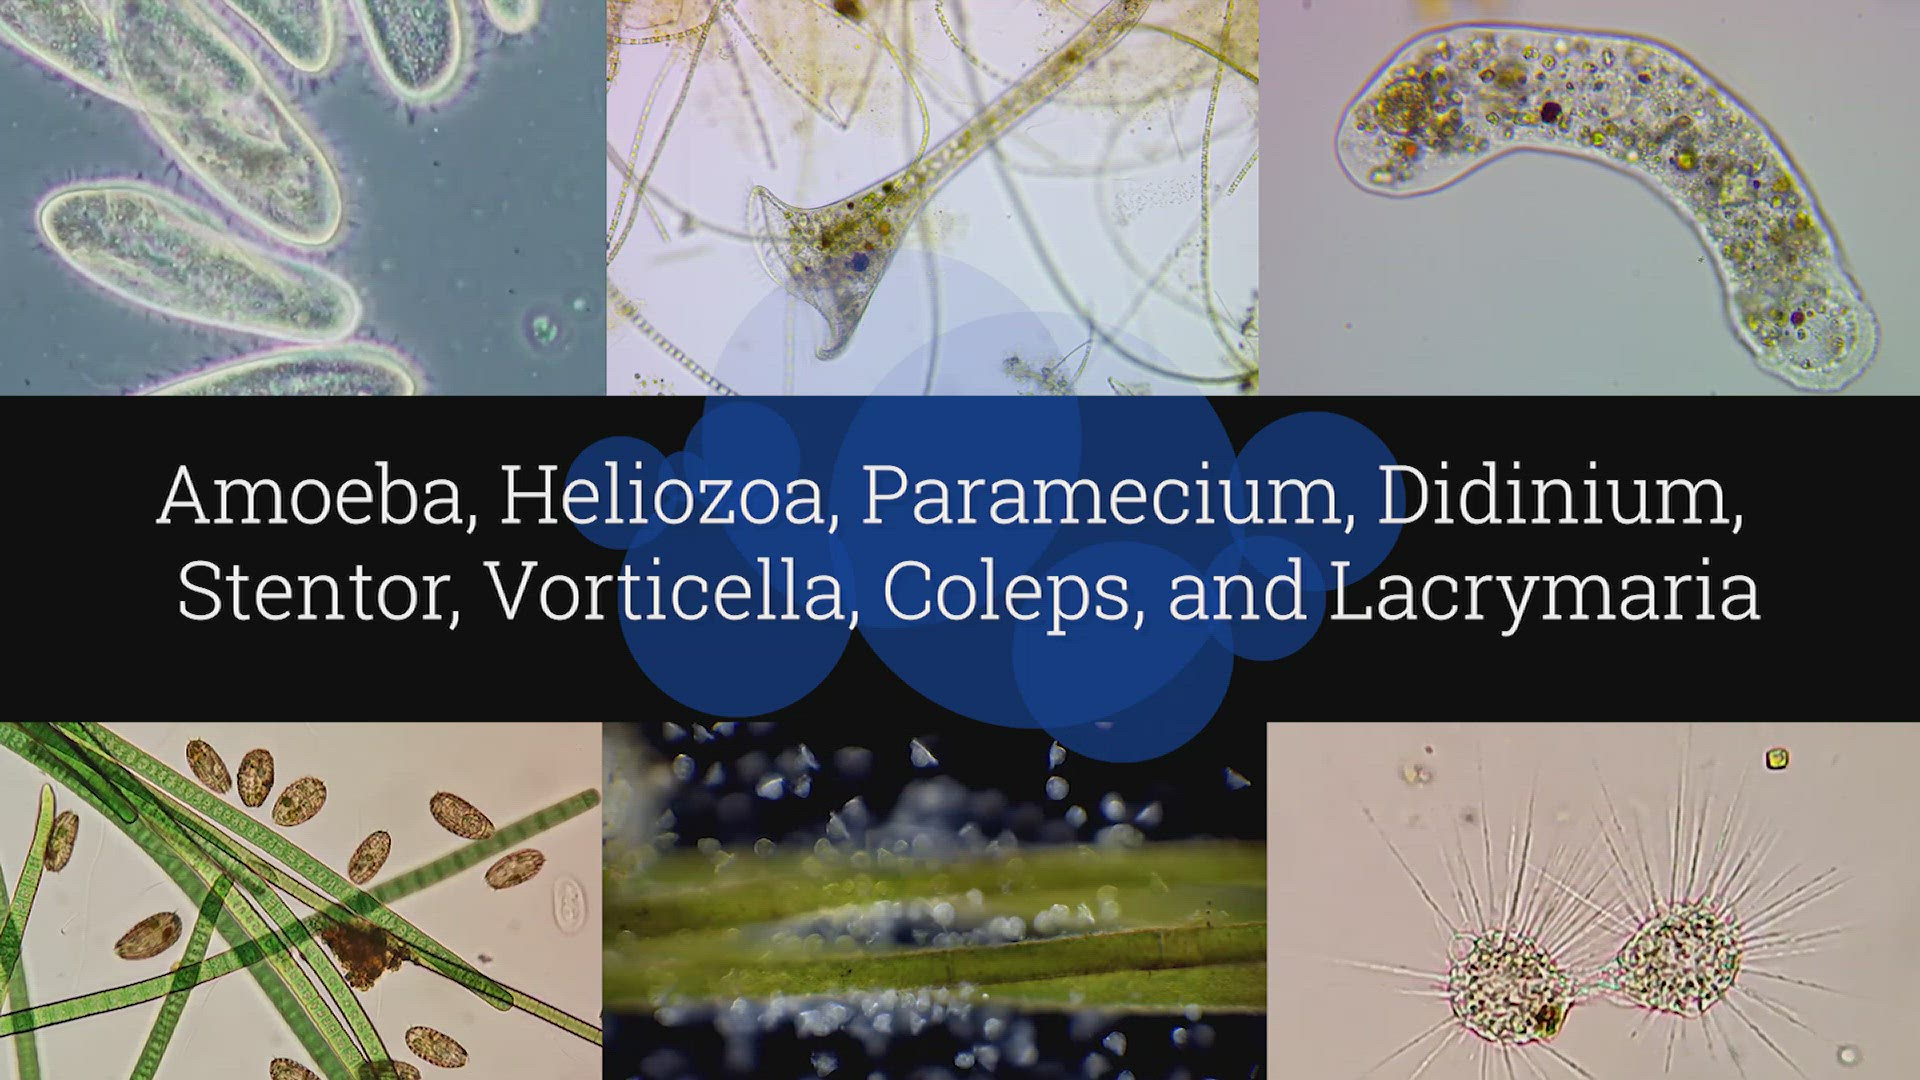 microscopic animals in pond water